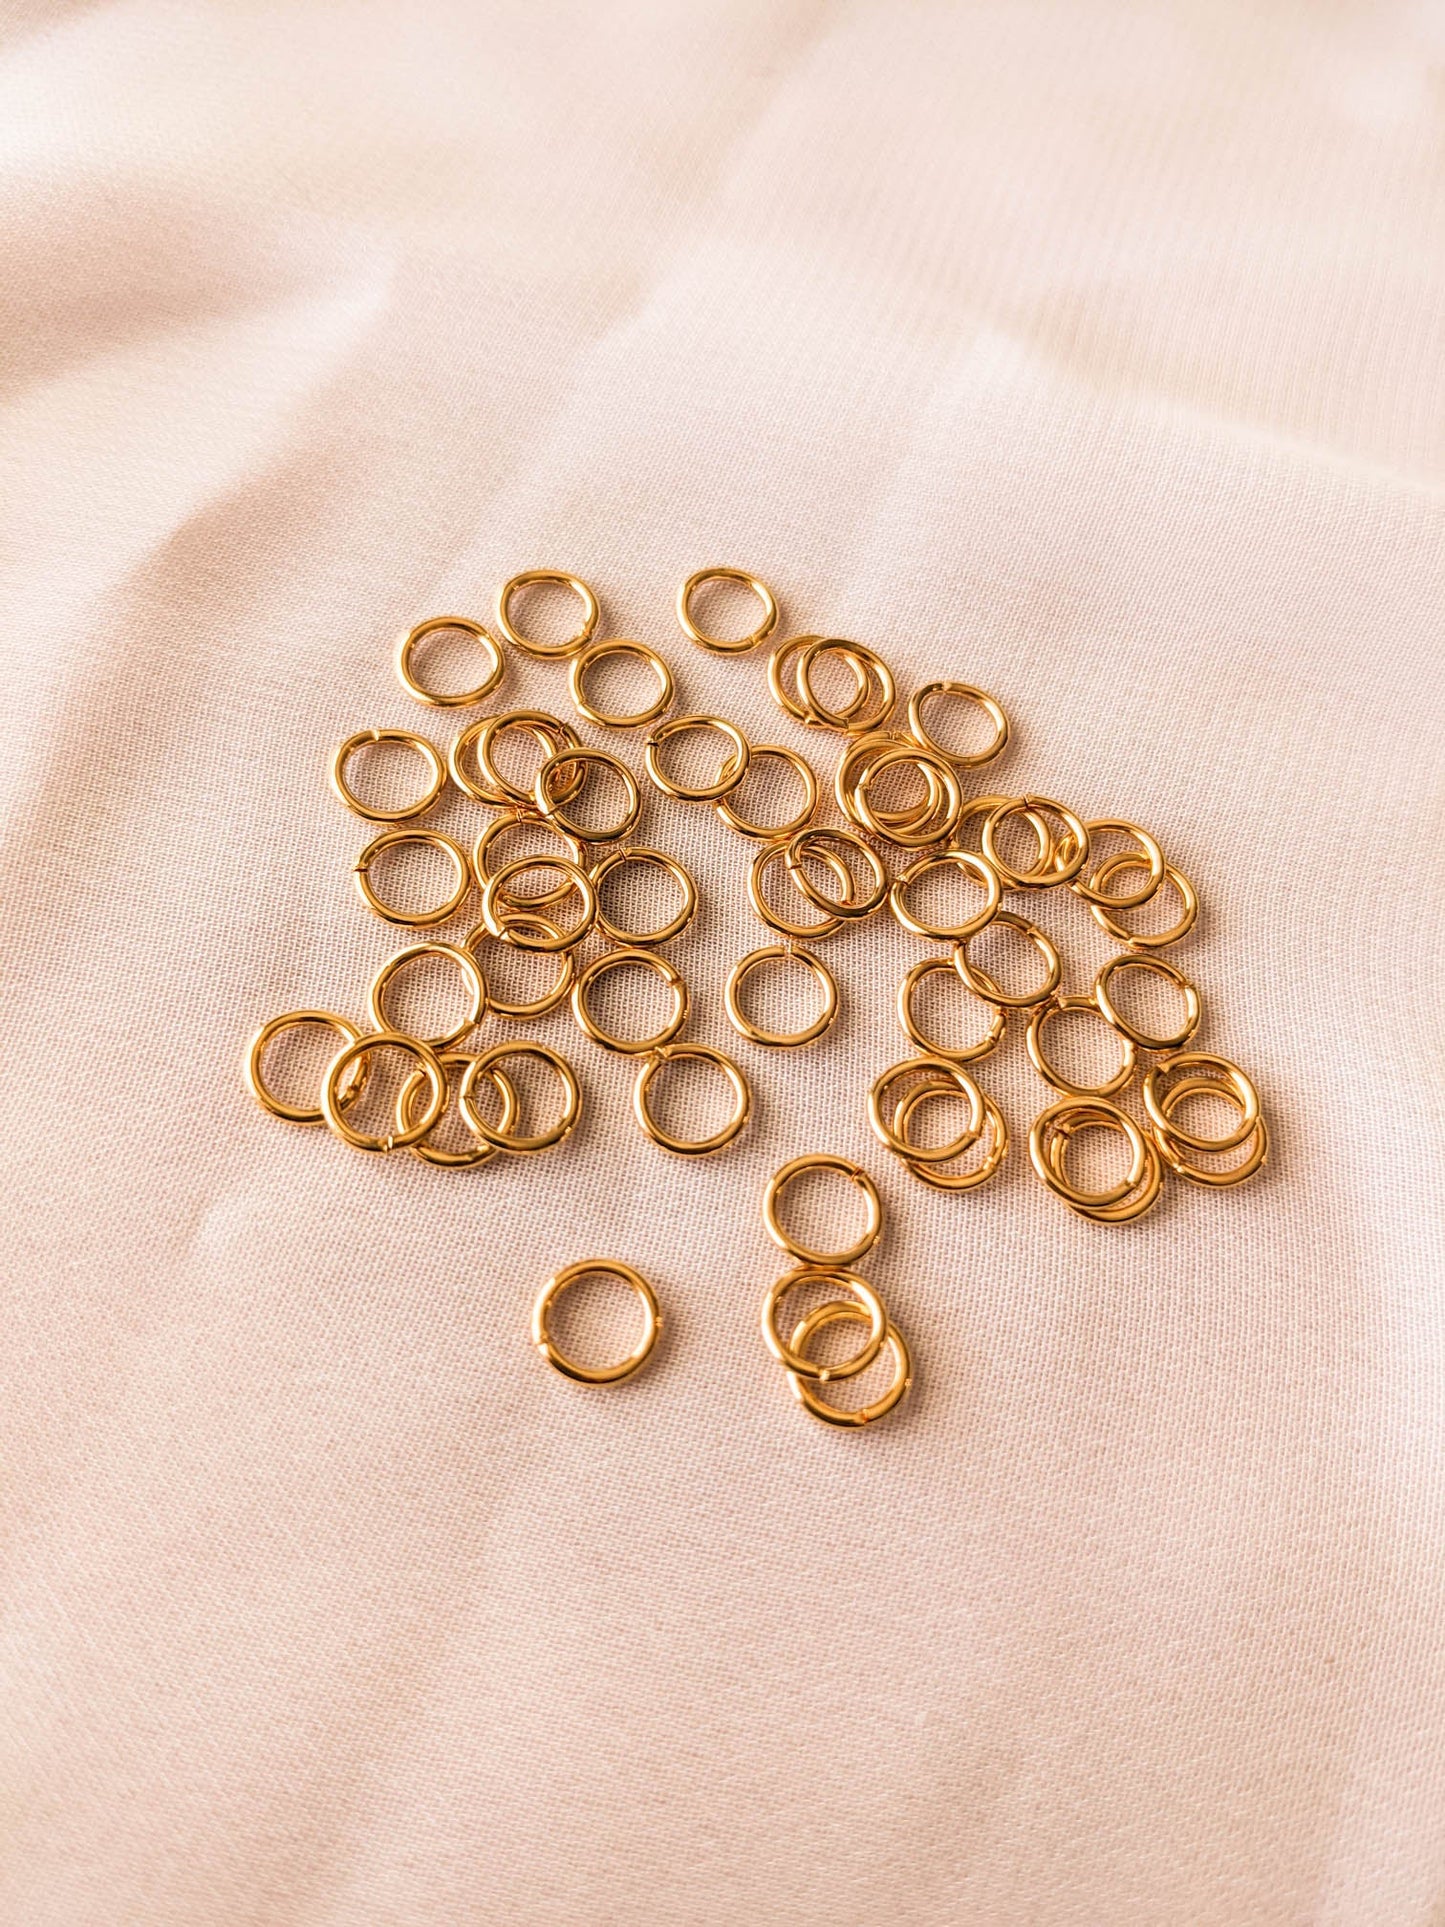 50 Pack - 6mm Jump Rings - Gold Plated Brass - 20 Gauge Wire